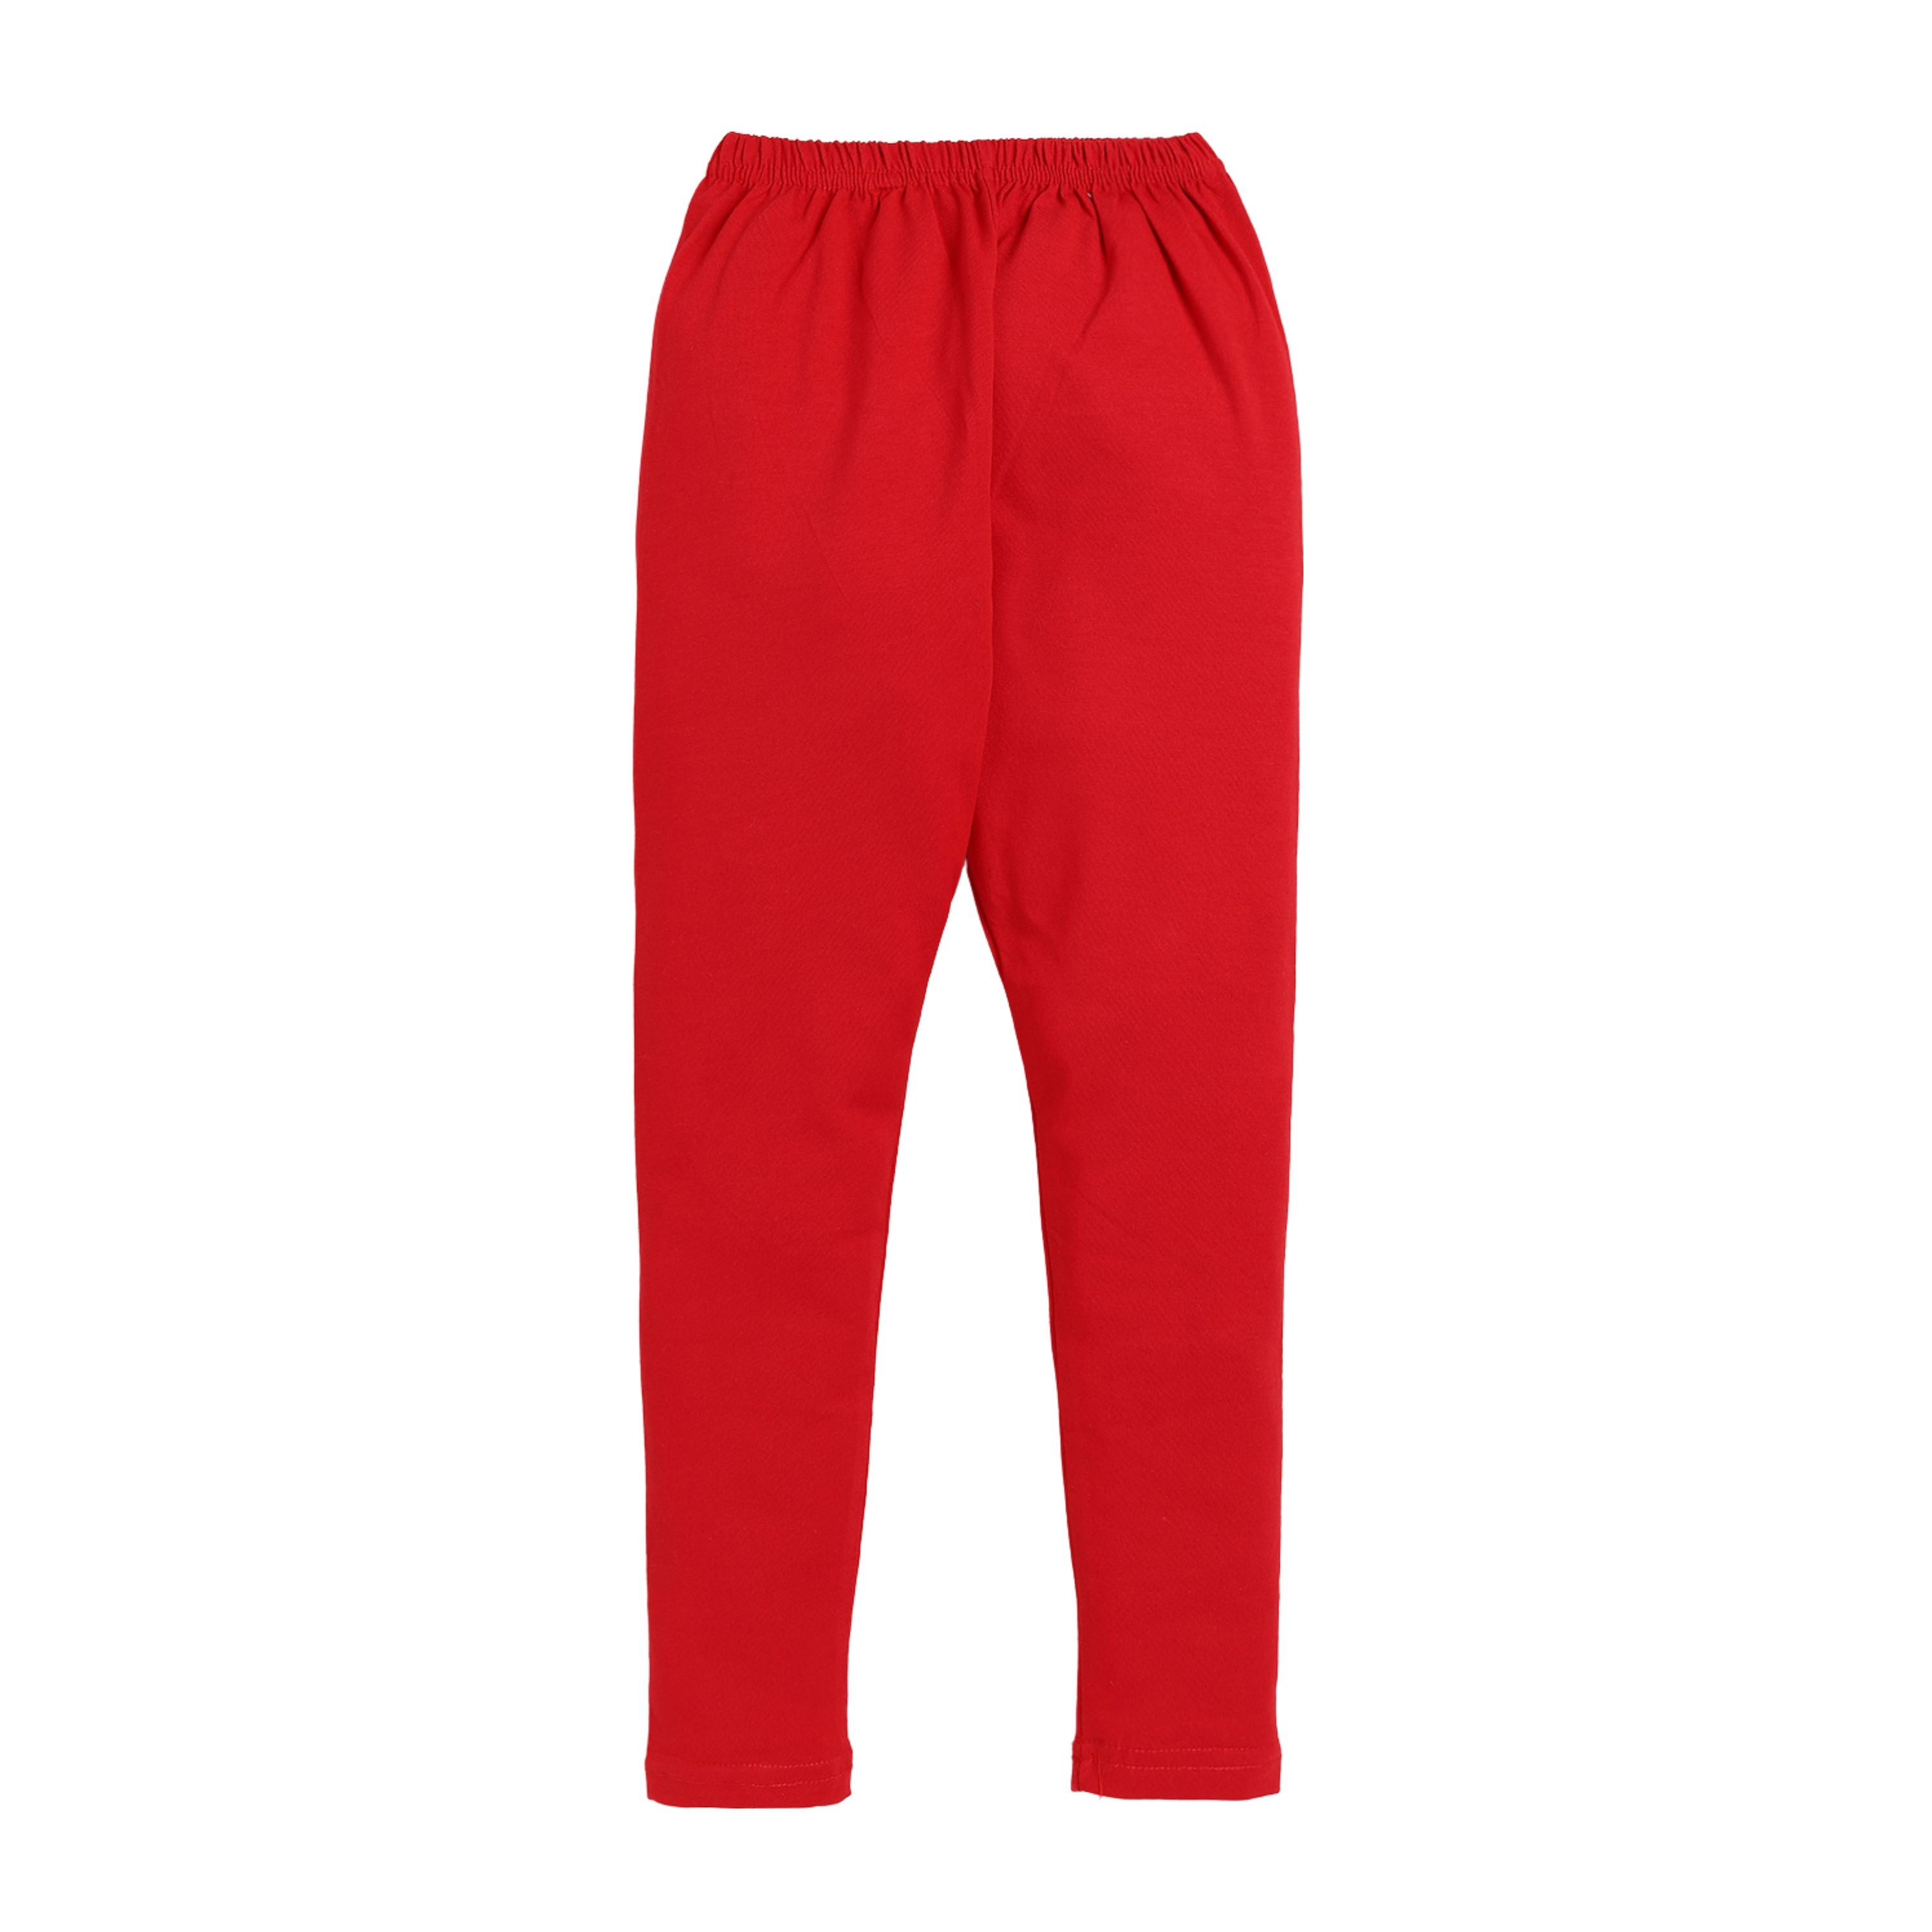 Stretchable Leggings For Girl's - RED